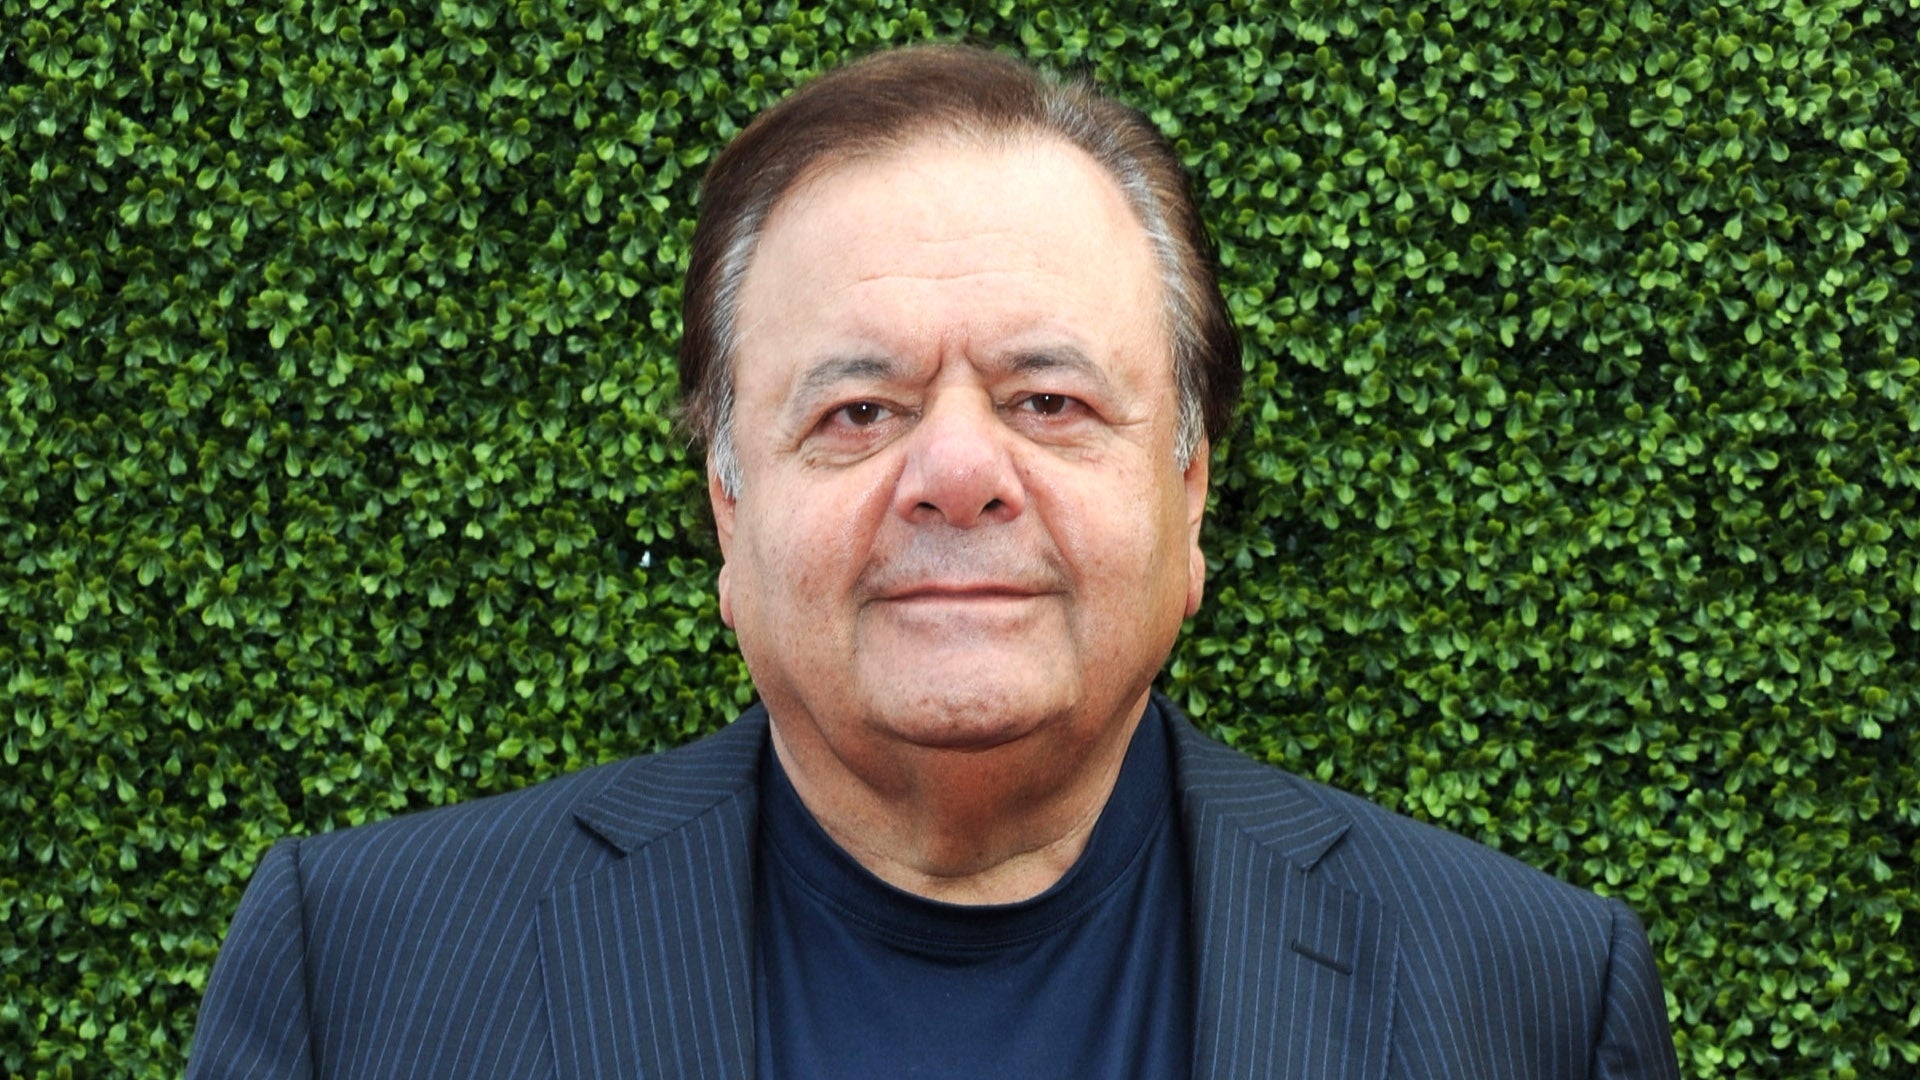 Paul Sorvino, 'Goodfellas' Actor and Mira Sorvino's Father, Dead at 83